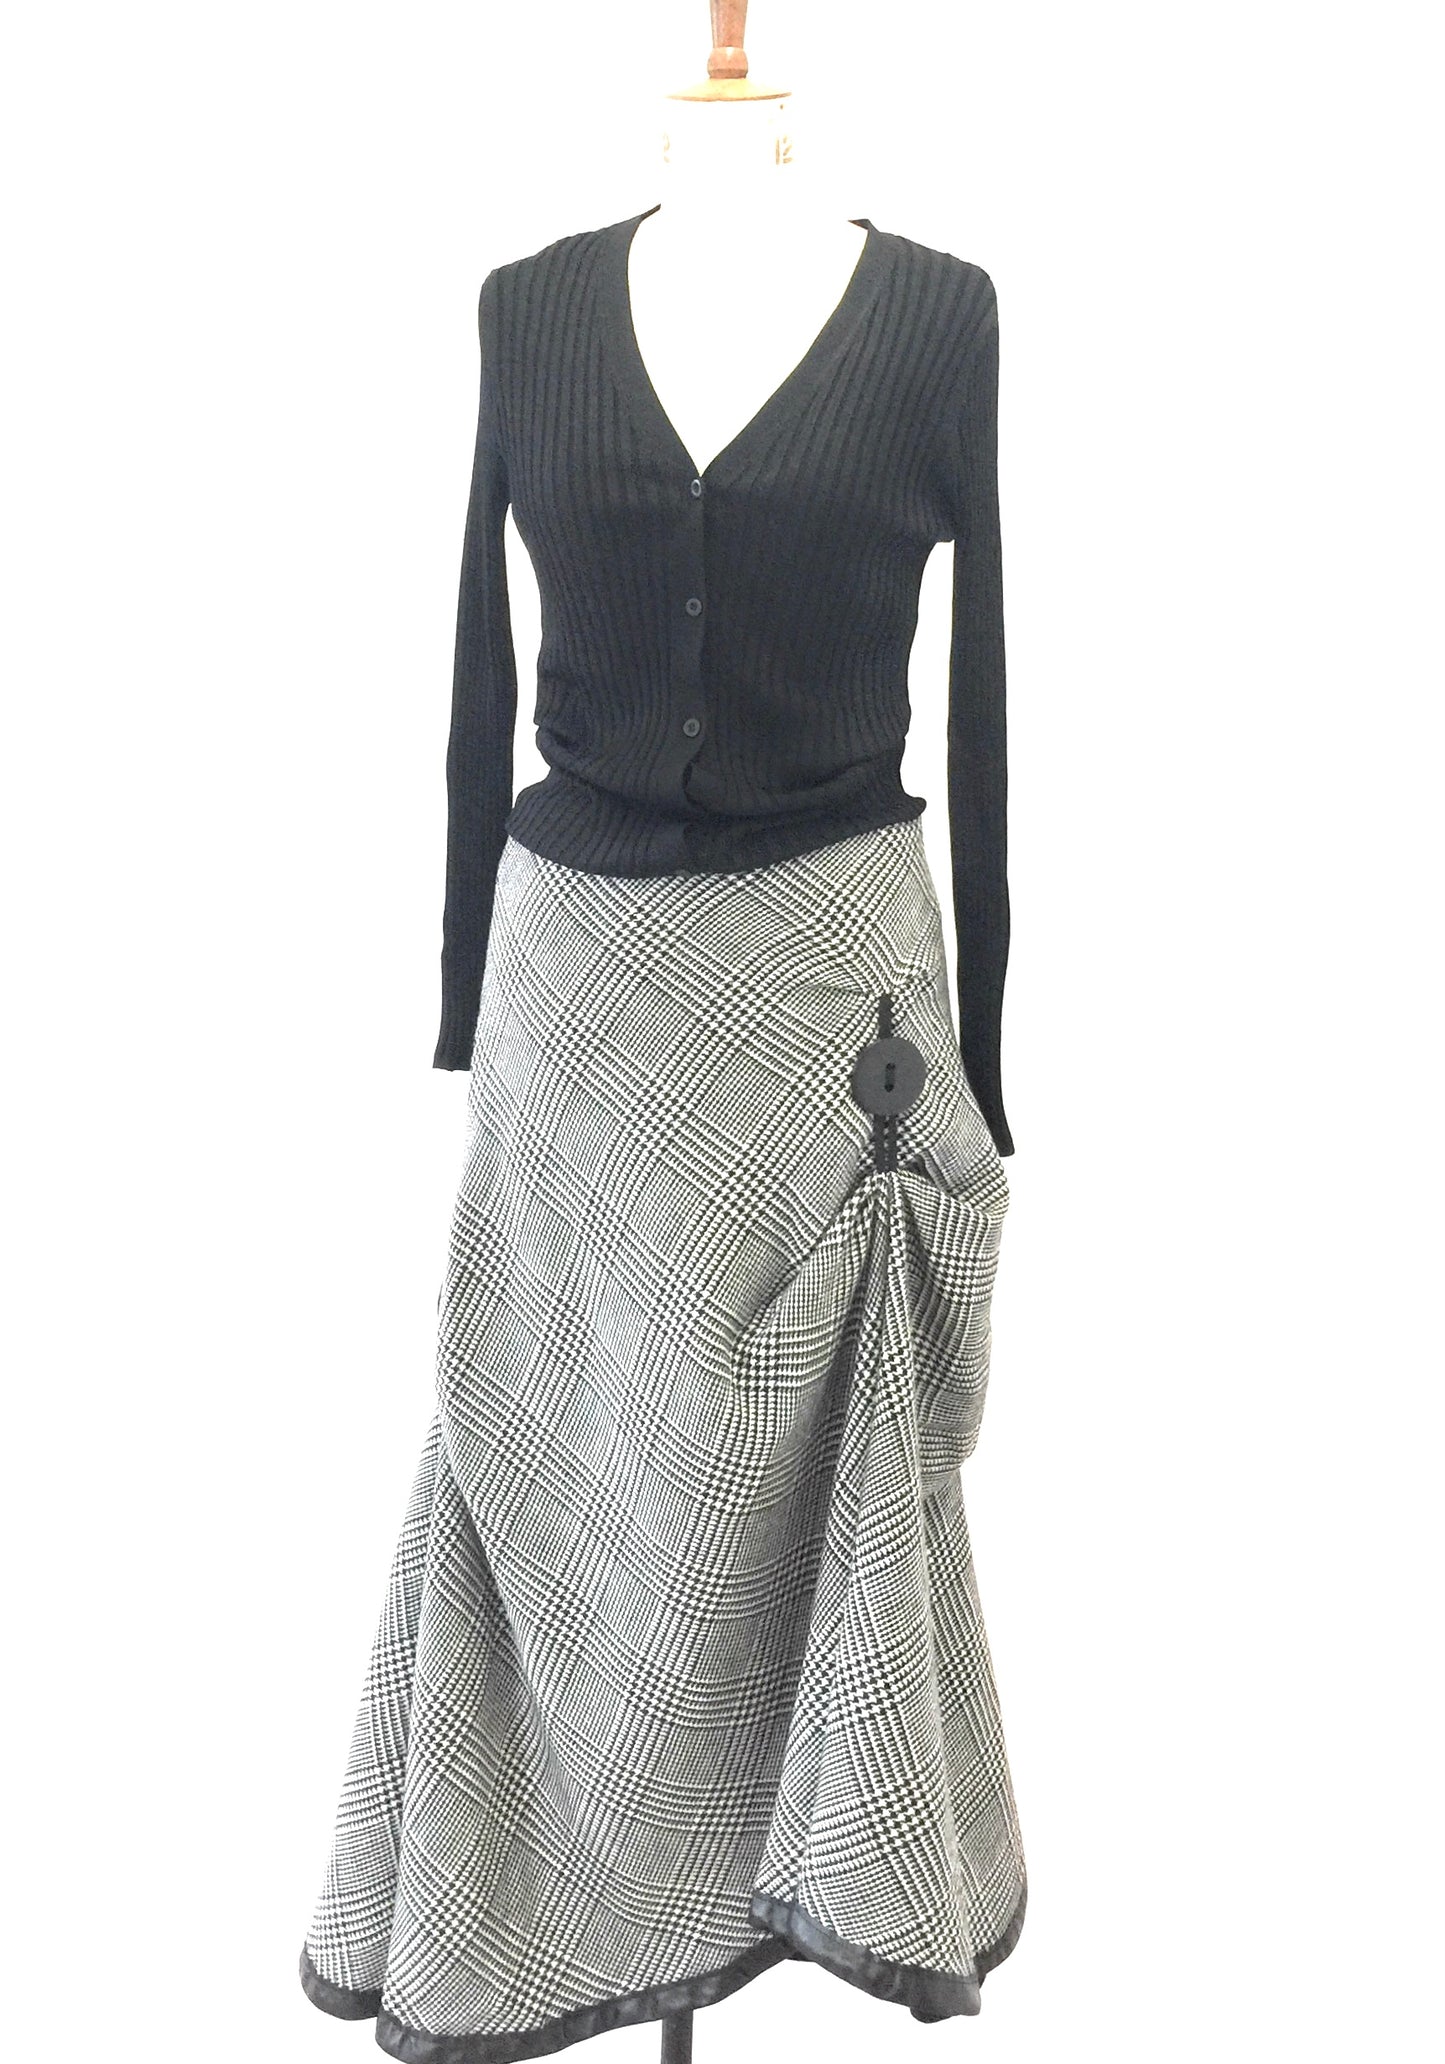 Couture wool check skirt. Long Flamenco style skirt with pleats